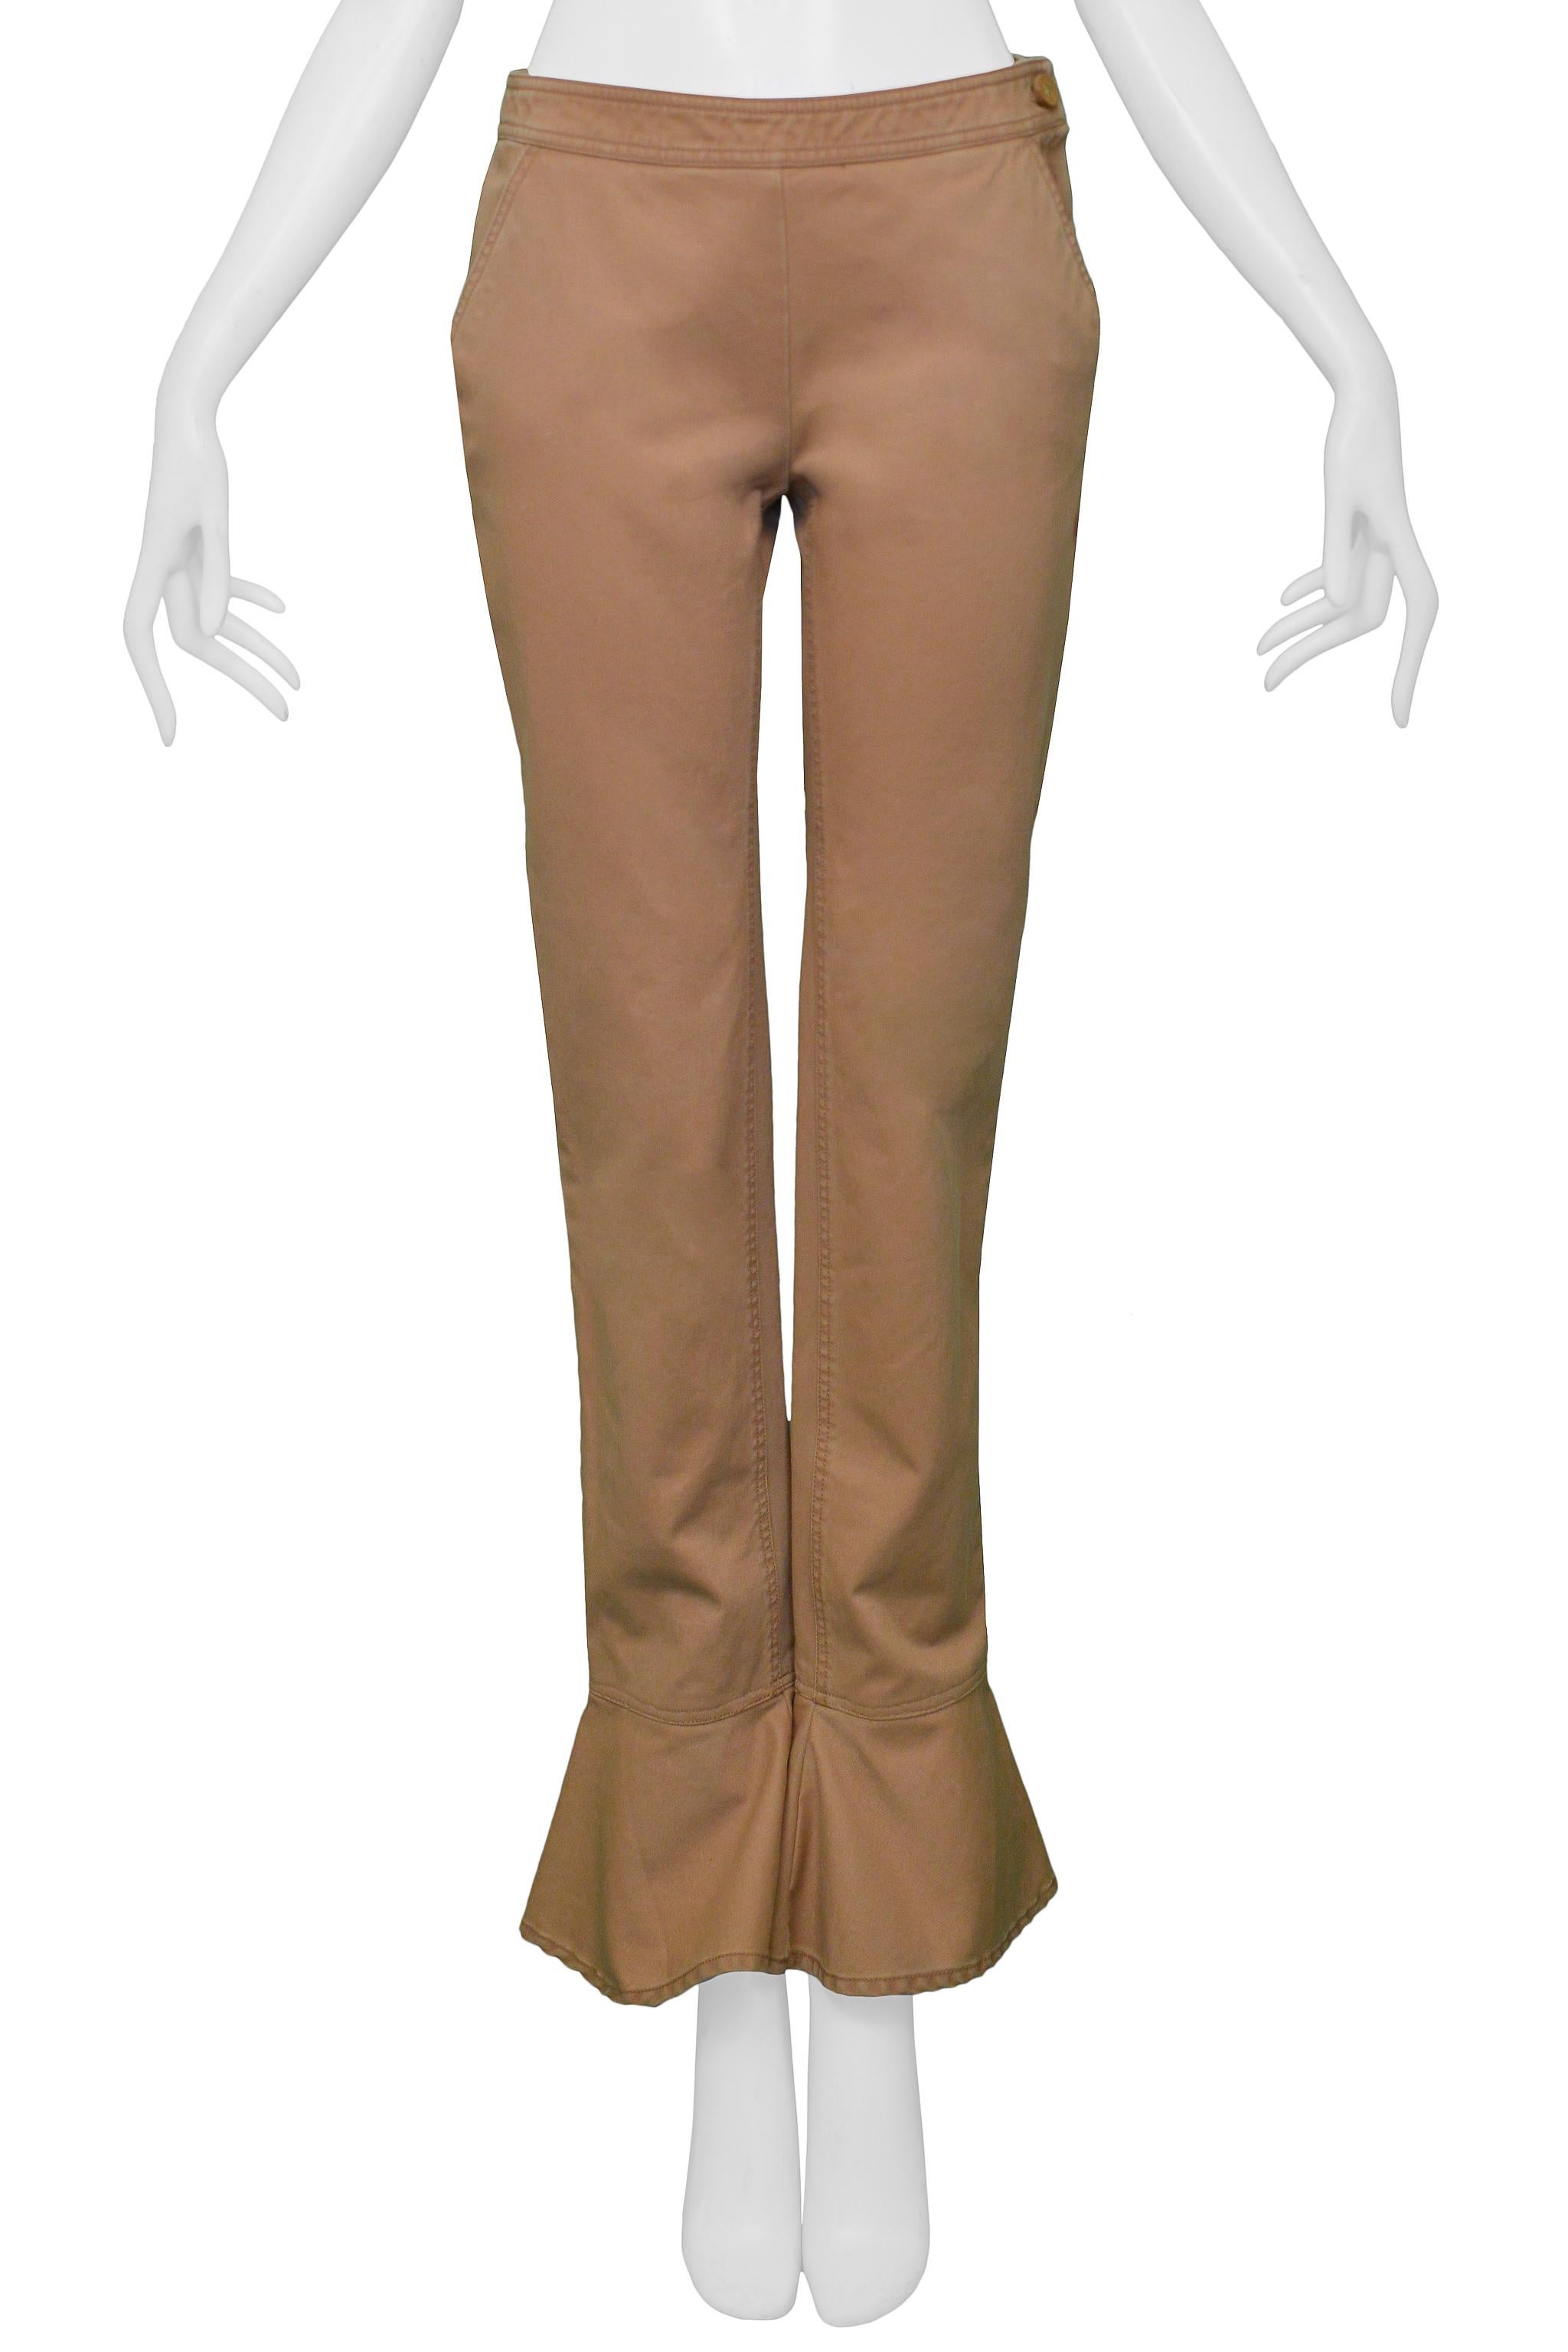 Brown Chanel Khaki Flared Cotton Pants For Sale